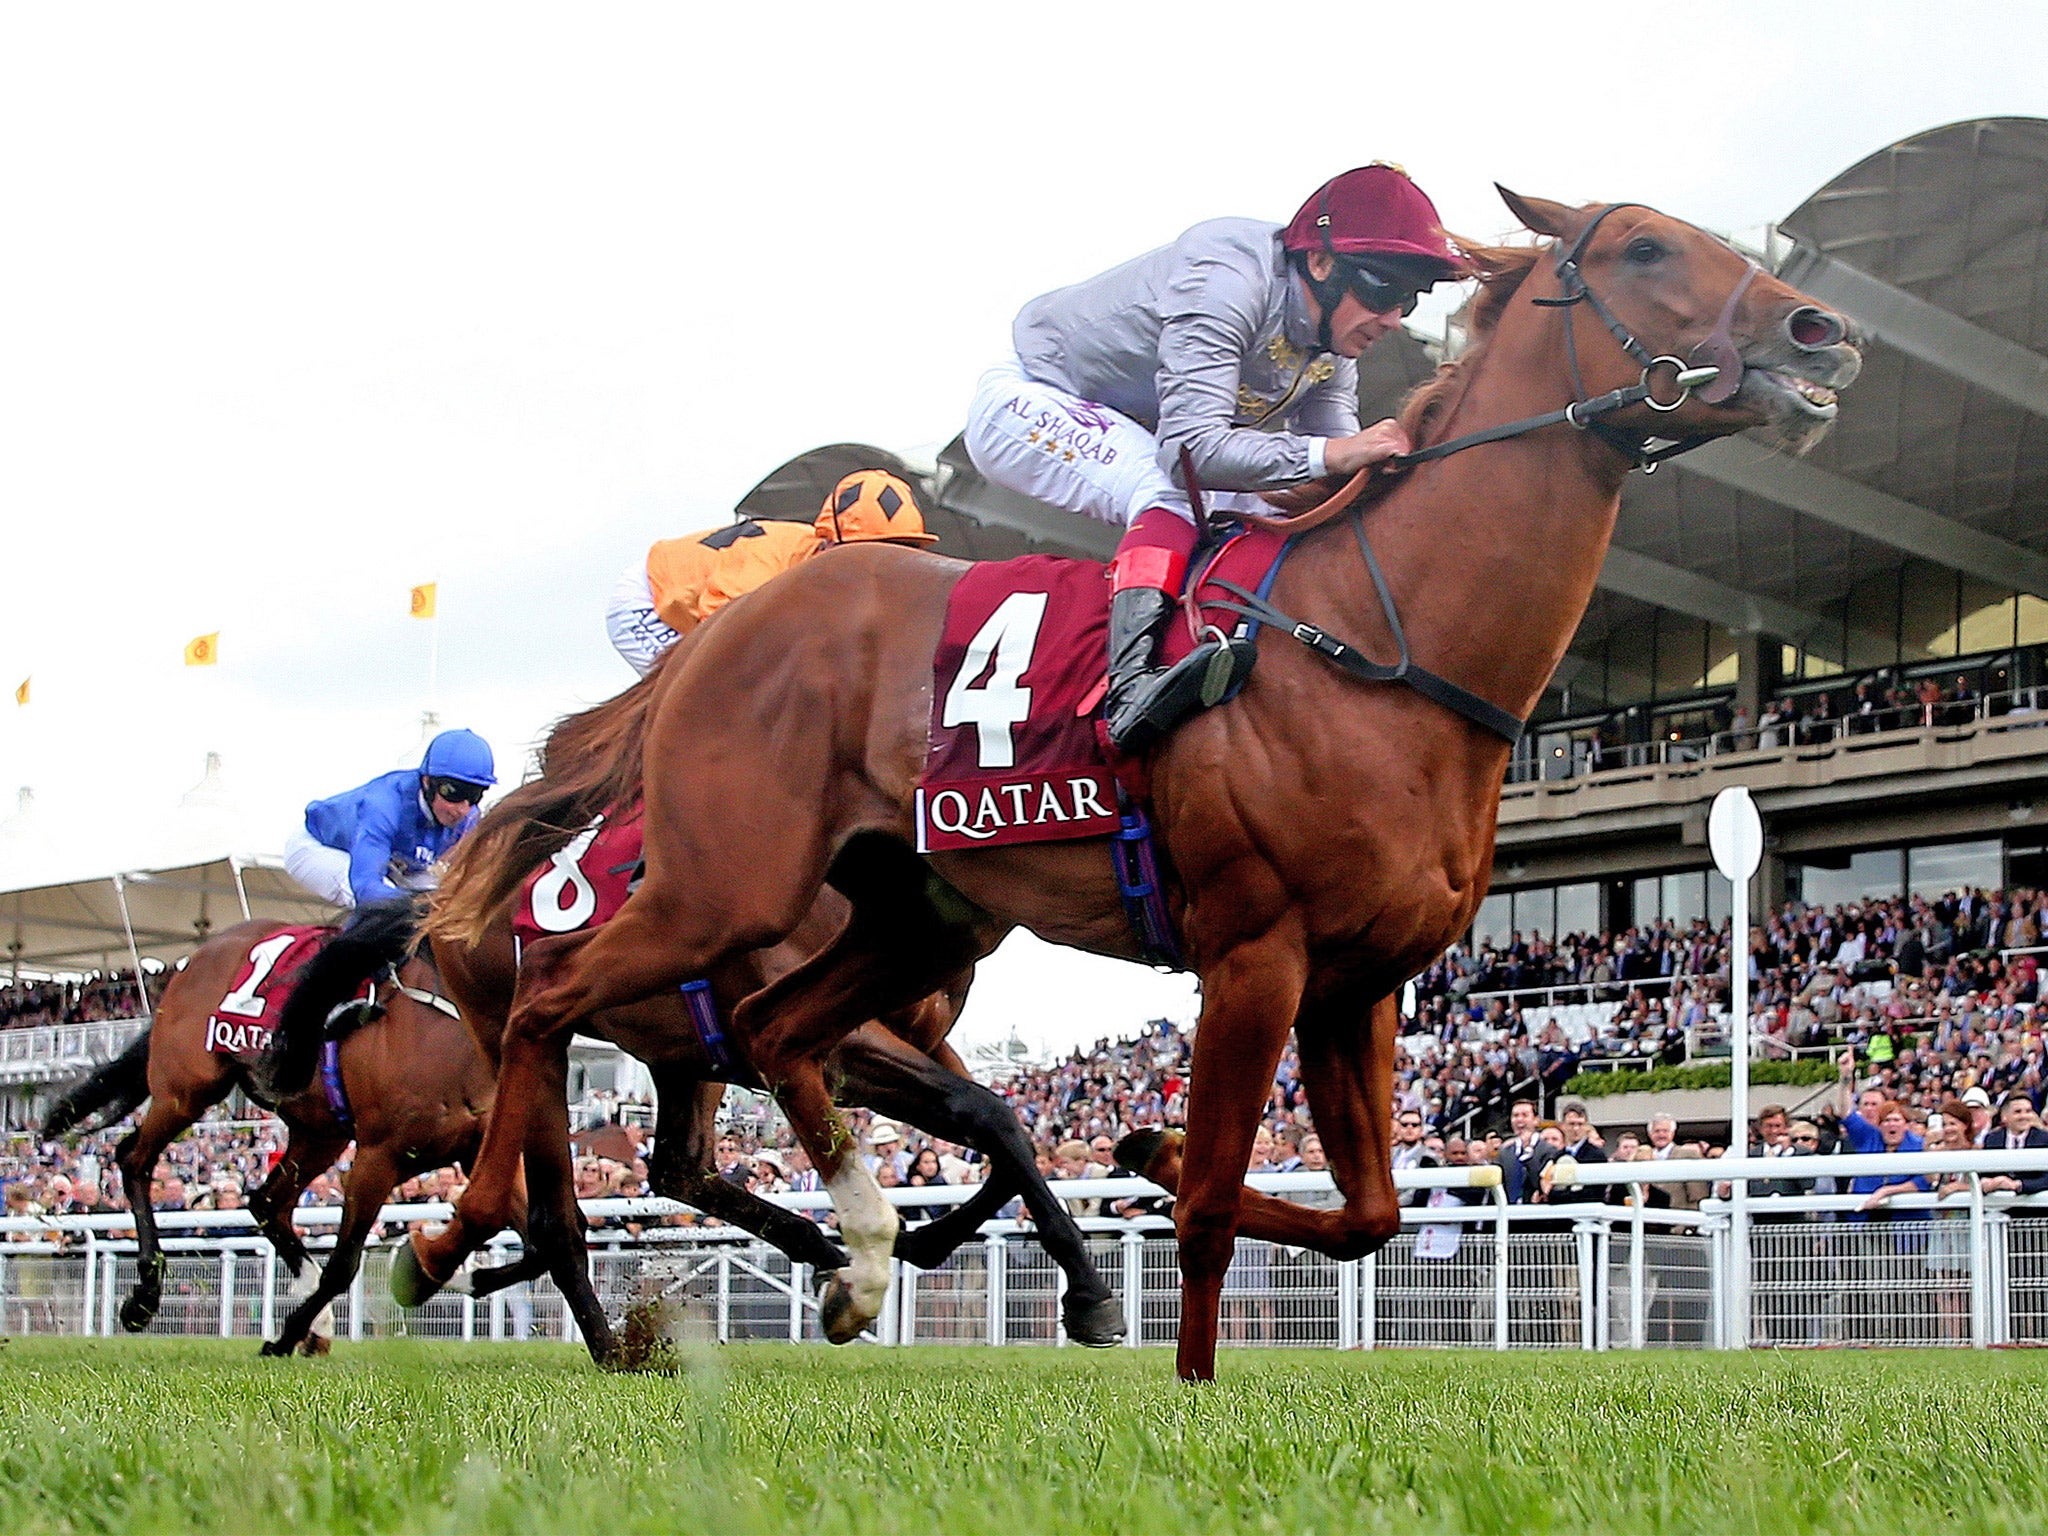 Galileo Gold wins the Vintage Stakes